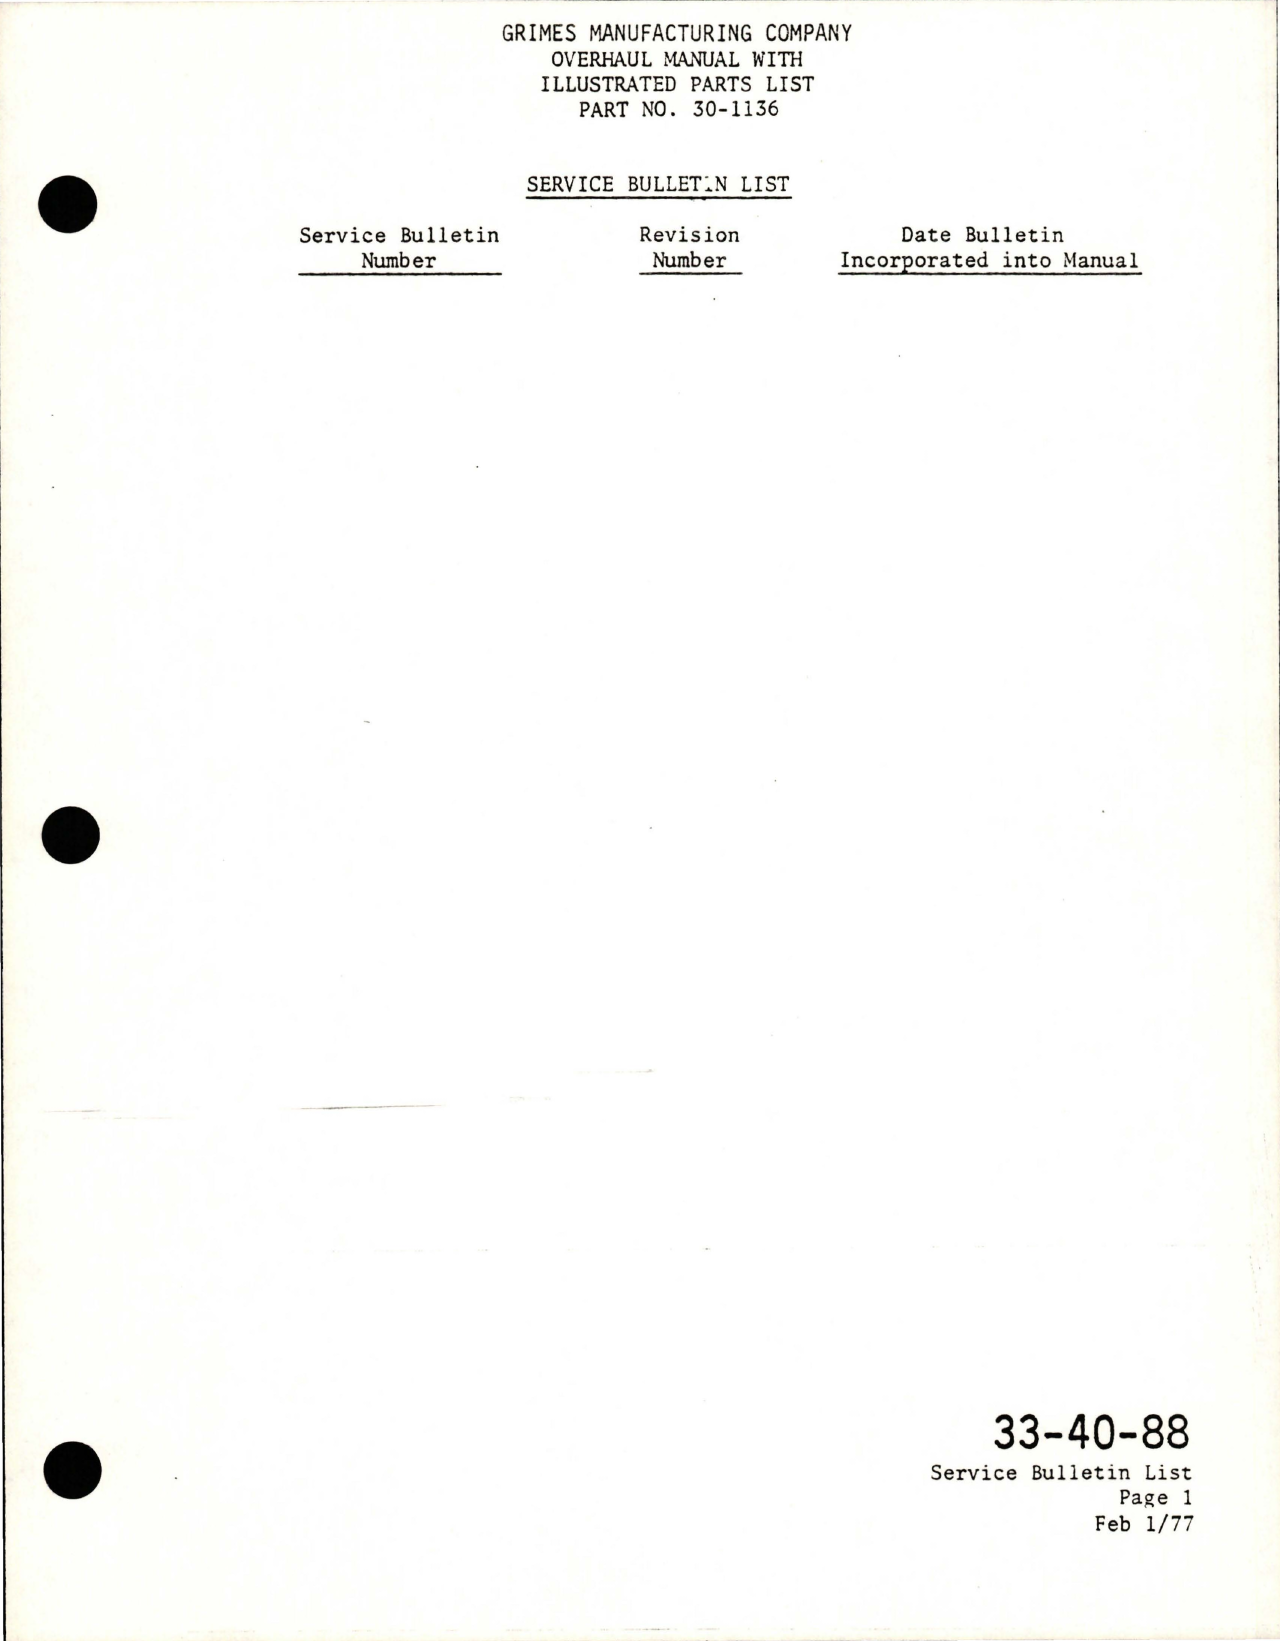 Sample page 5 from AirCorps Library document: Overhaul Manual with Illustrated Parts List for Navigational Strobe Light